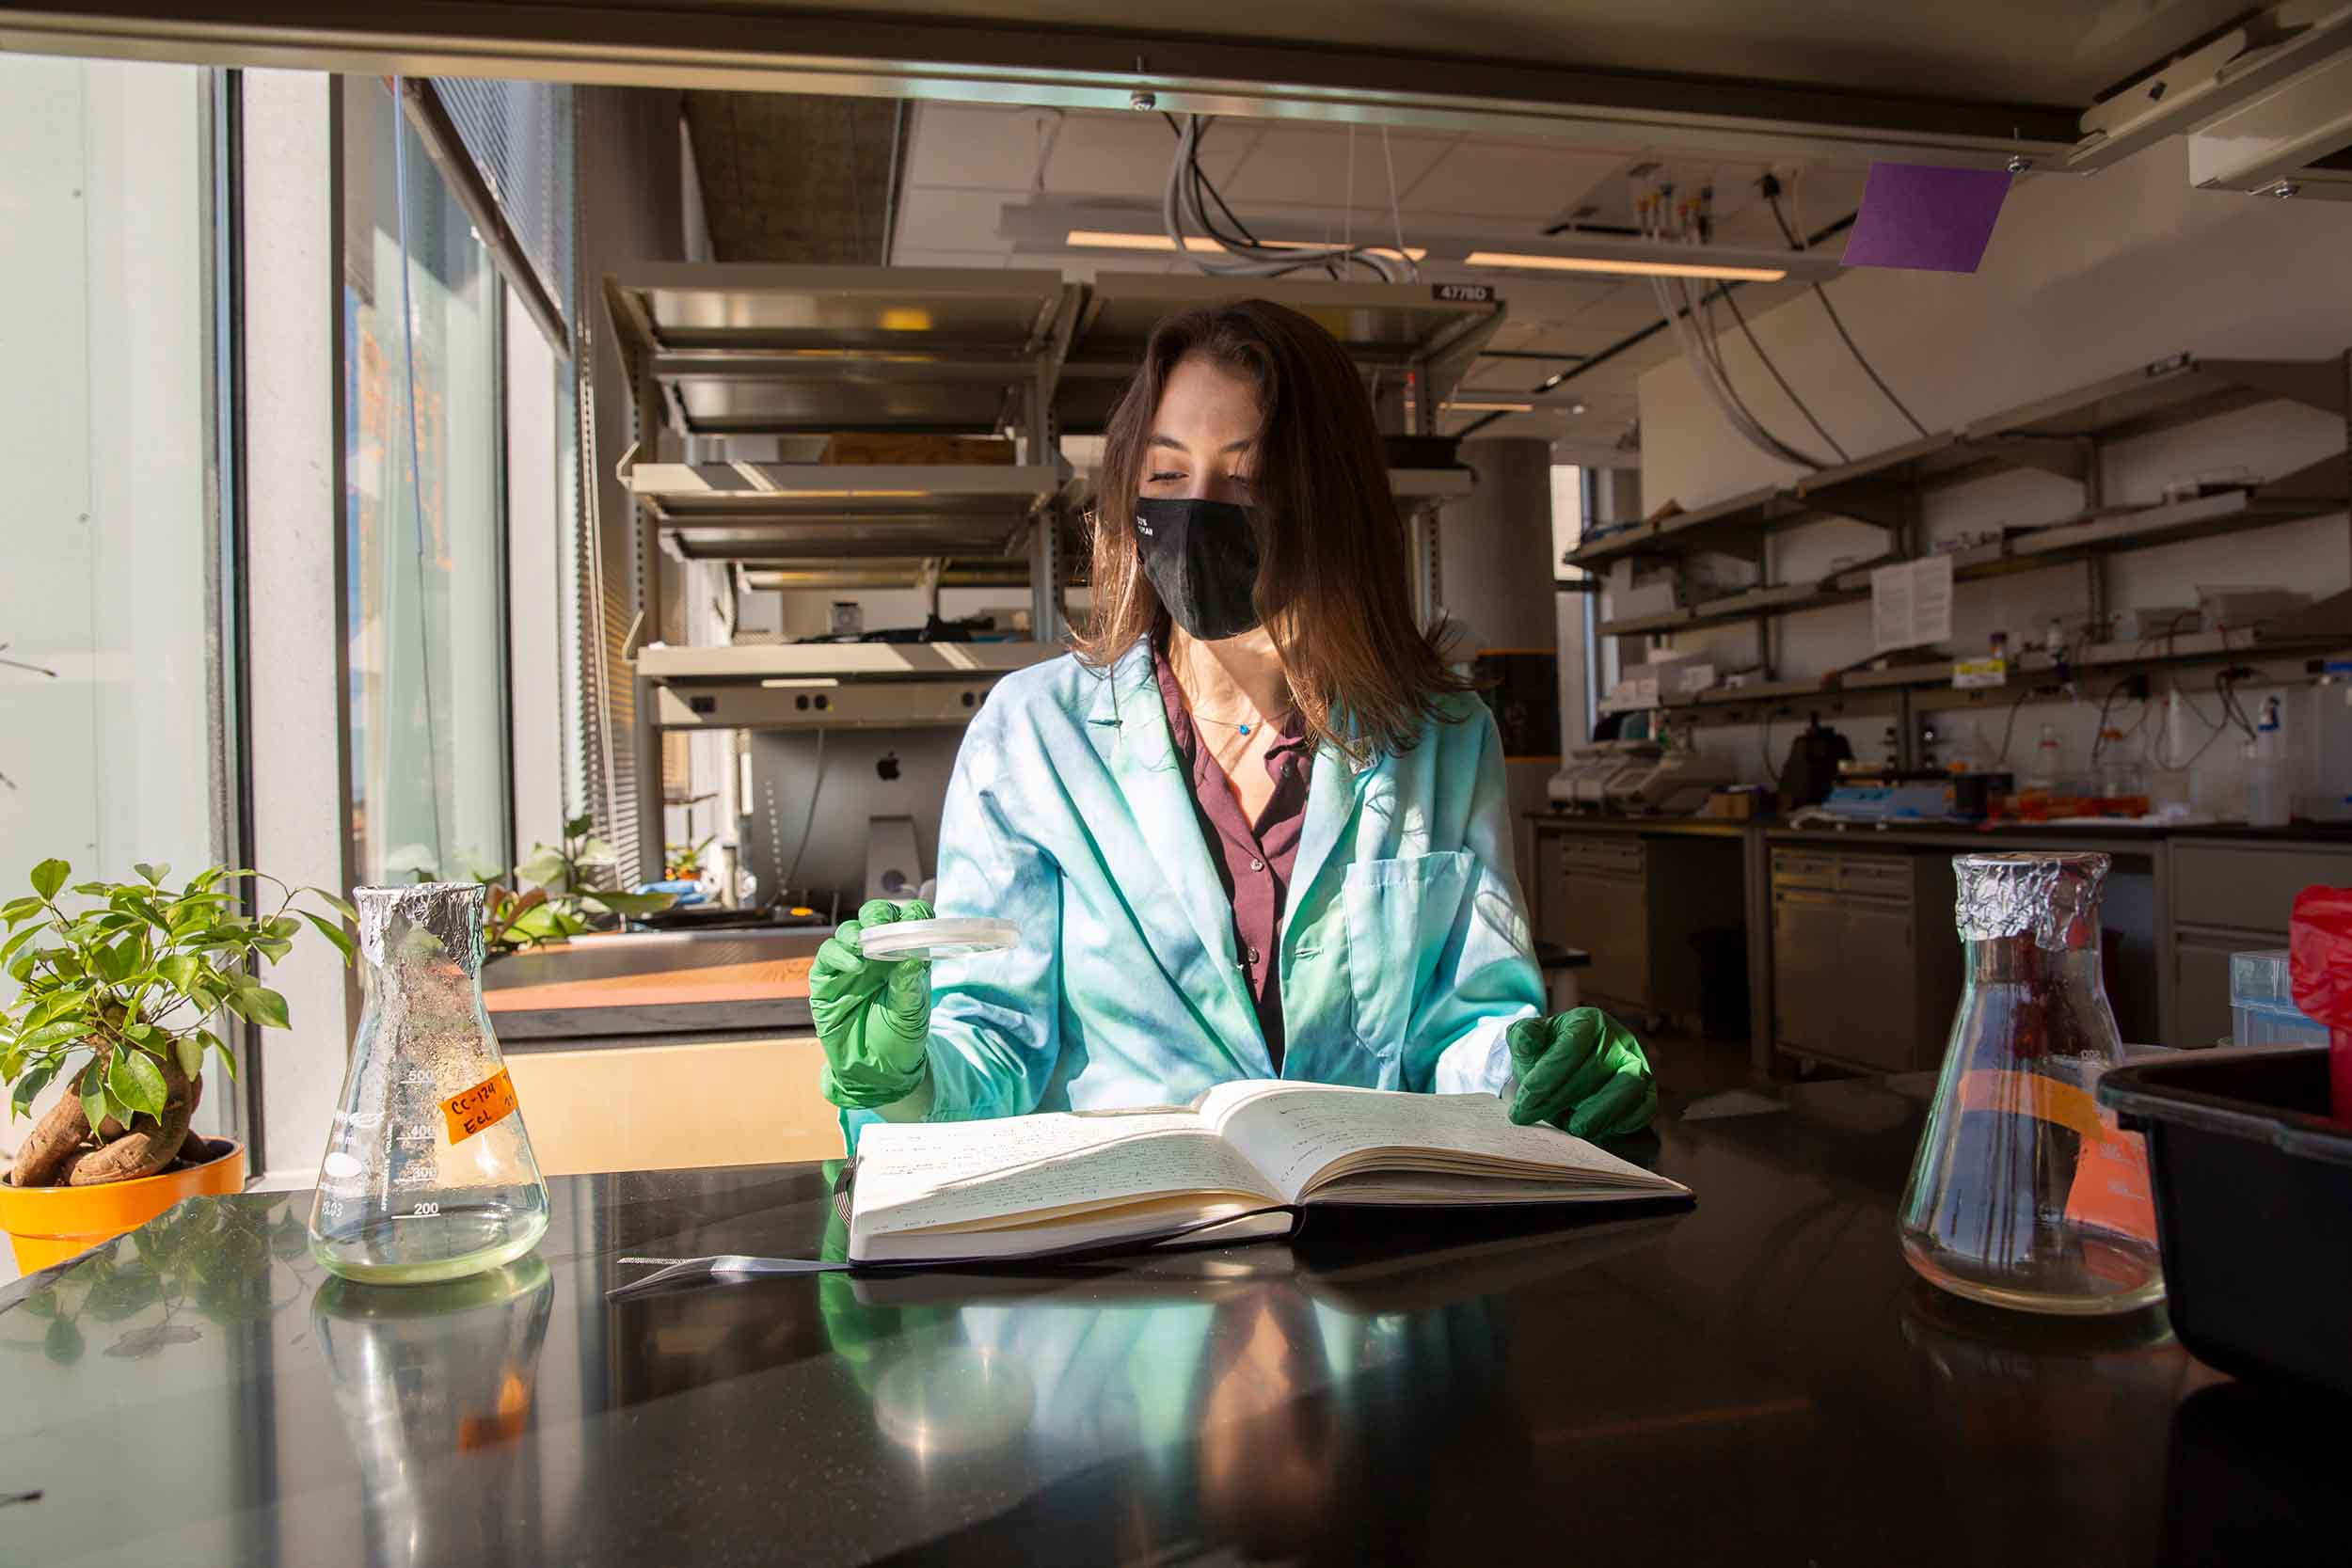 Emma Lieberman sits at a lab table studying the contents of a petri dish